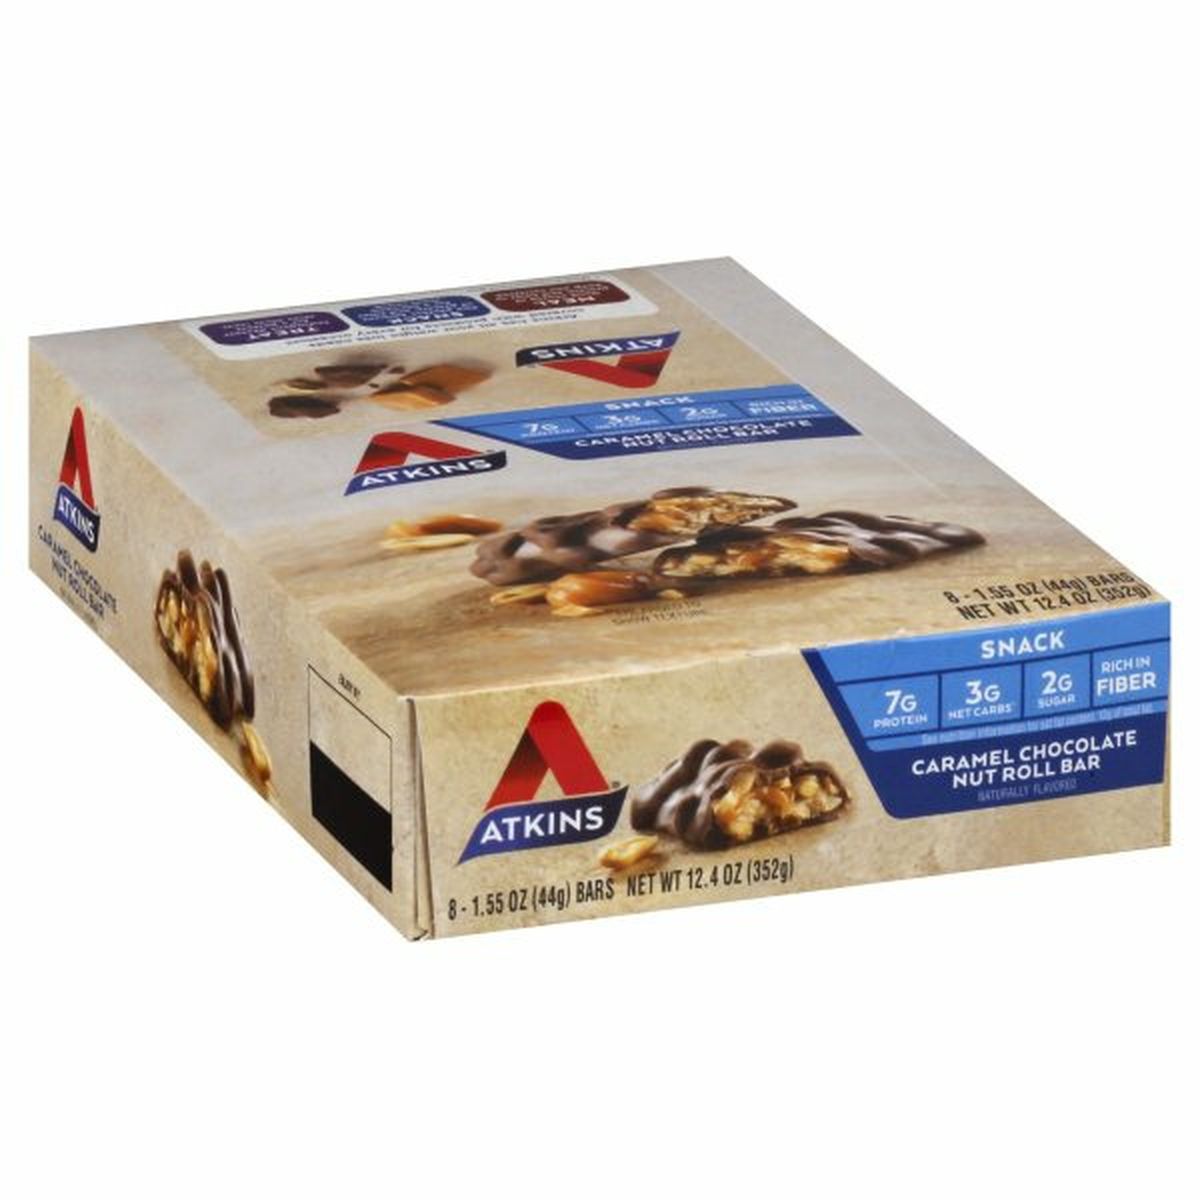 Calories in Atkins Snack Bar, Caramel Chocolate Nut Roll